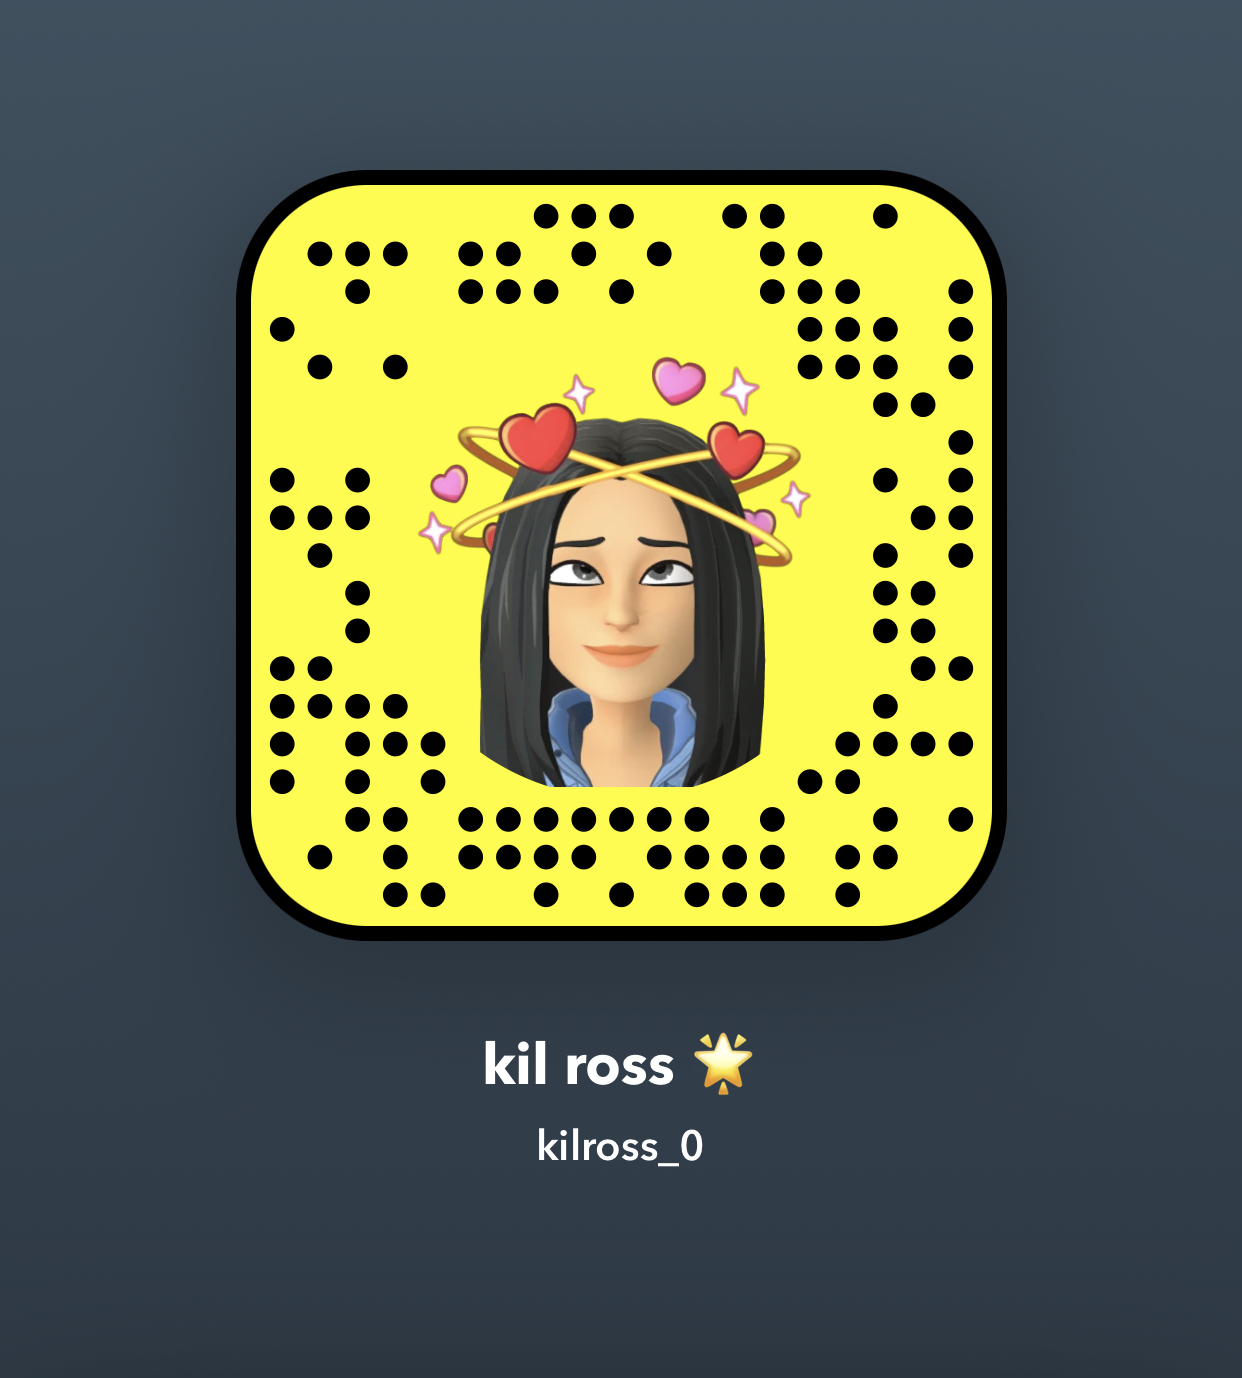 Im down for meetup and you can hmu on sc: kilross_0